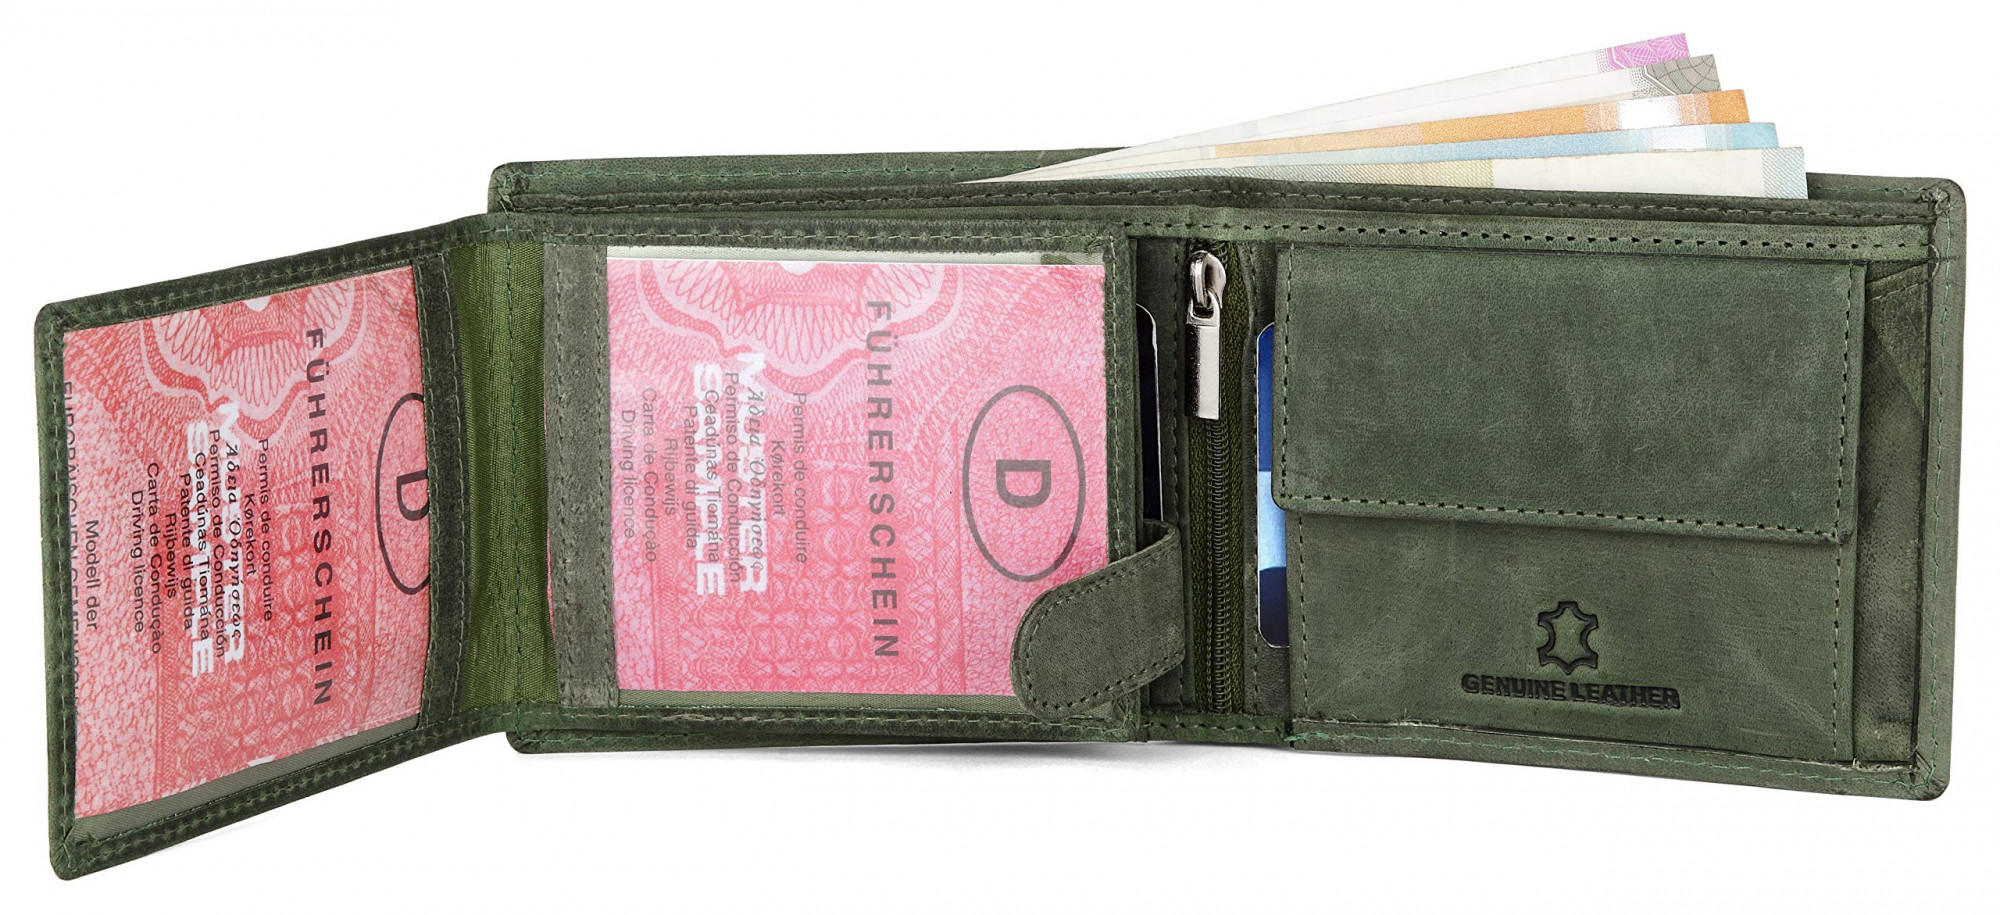 WildHorn Green Leather Wallet for Men I 9 Card Slots I 2 Currency & Secret Compartments I 1 Zipper & 3 ID Card Slots